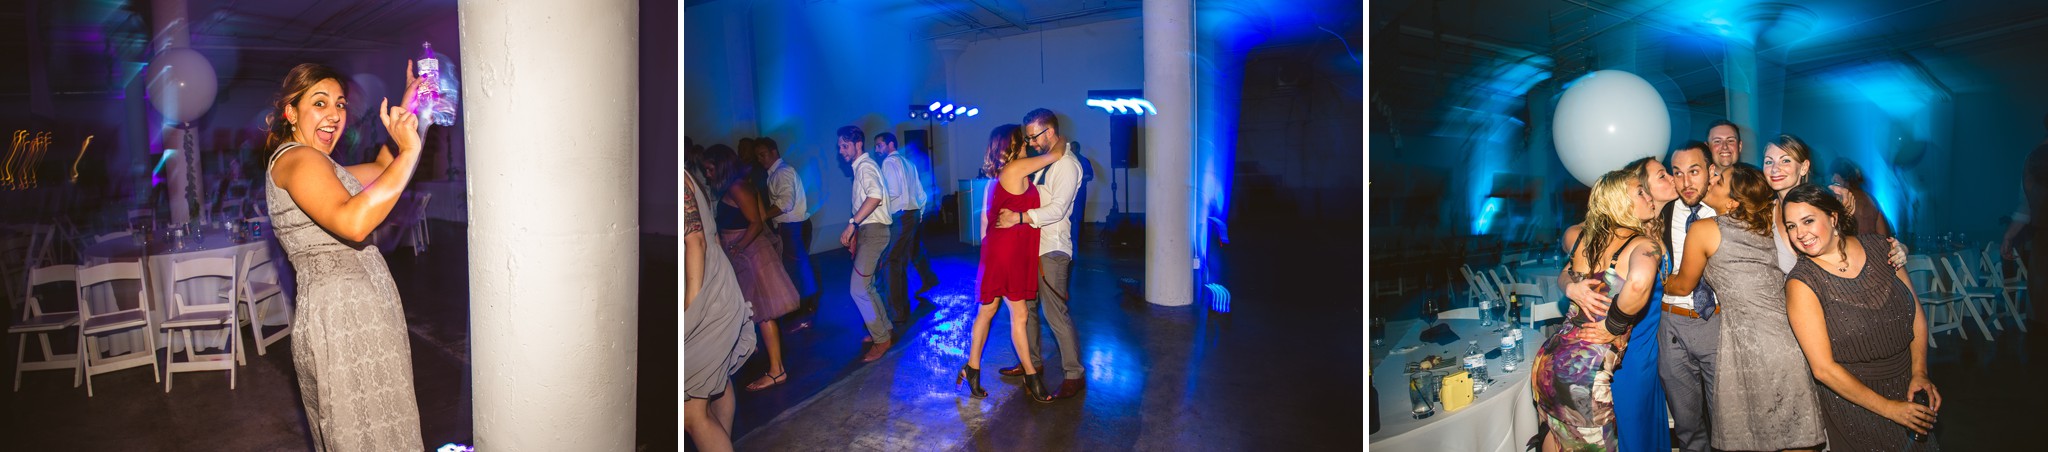 downtown-cleveland-red-space-events-wedding-photos-2